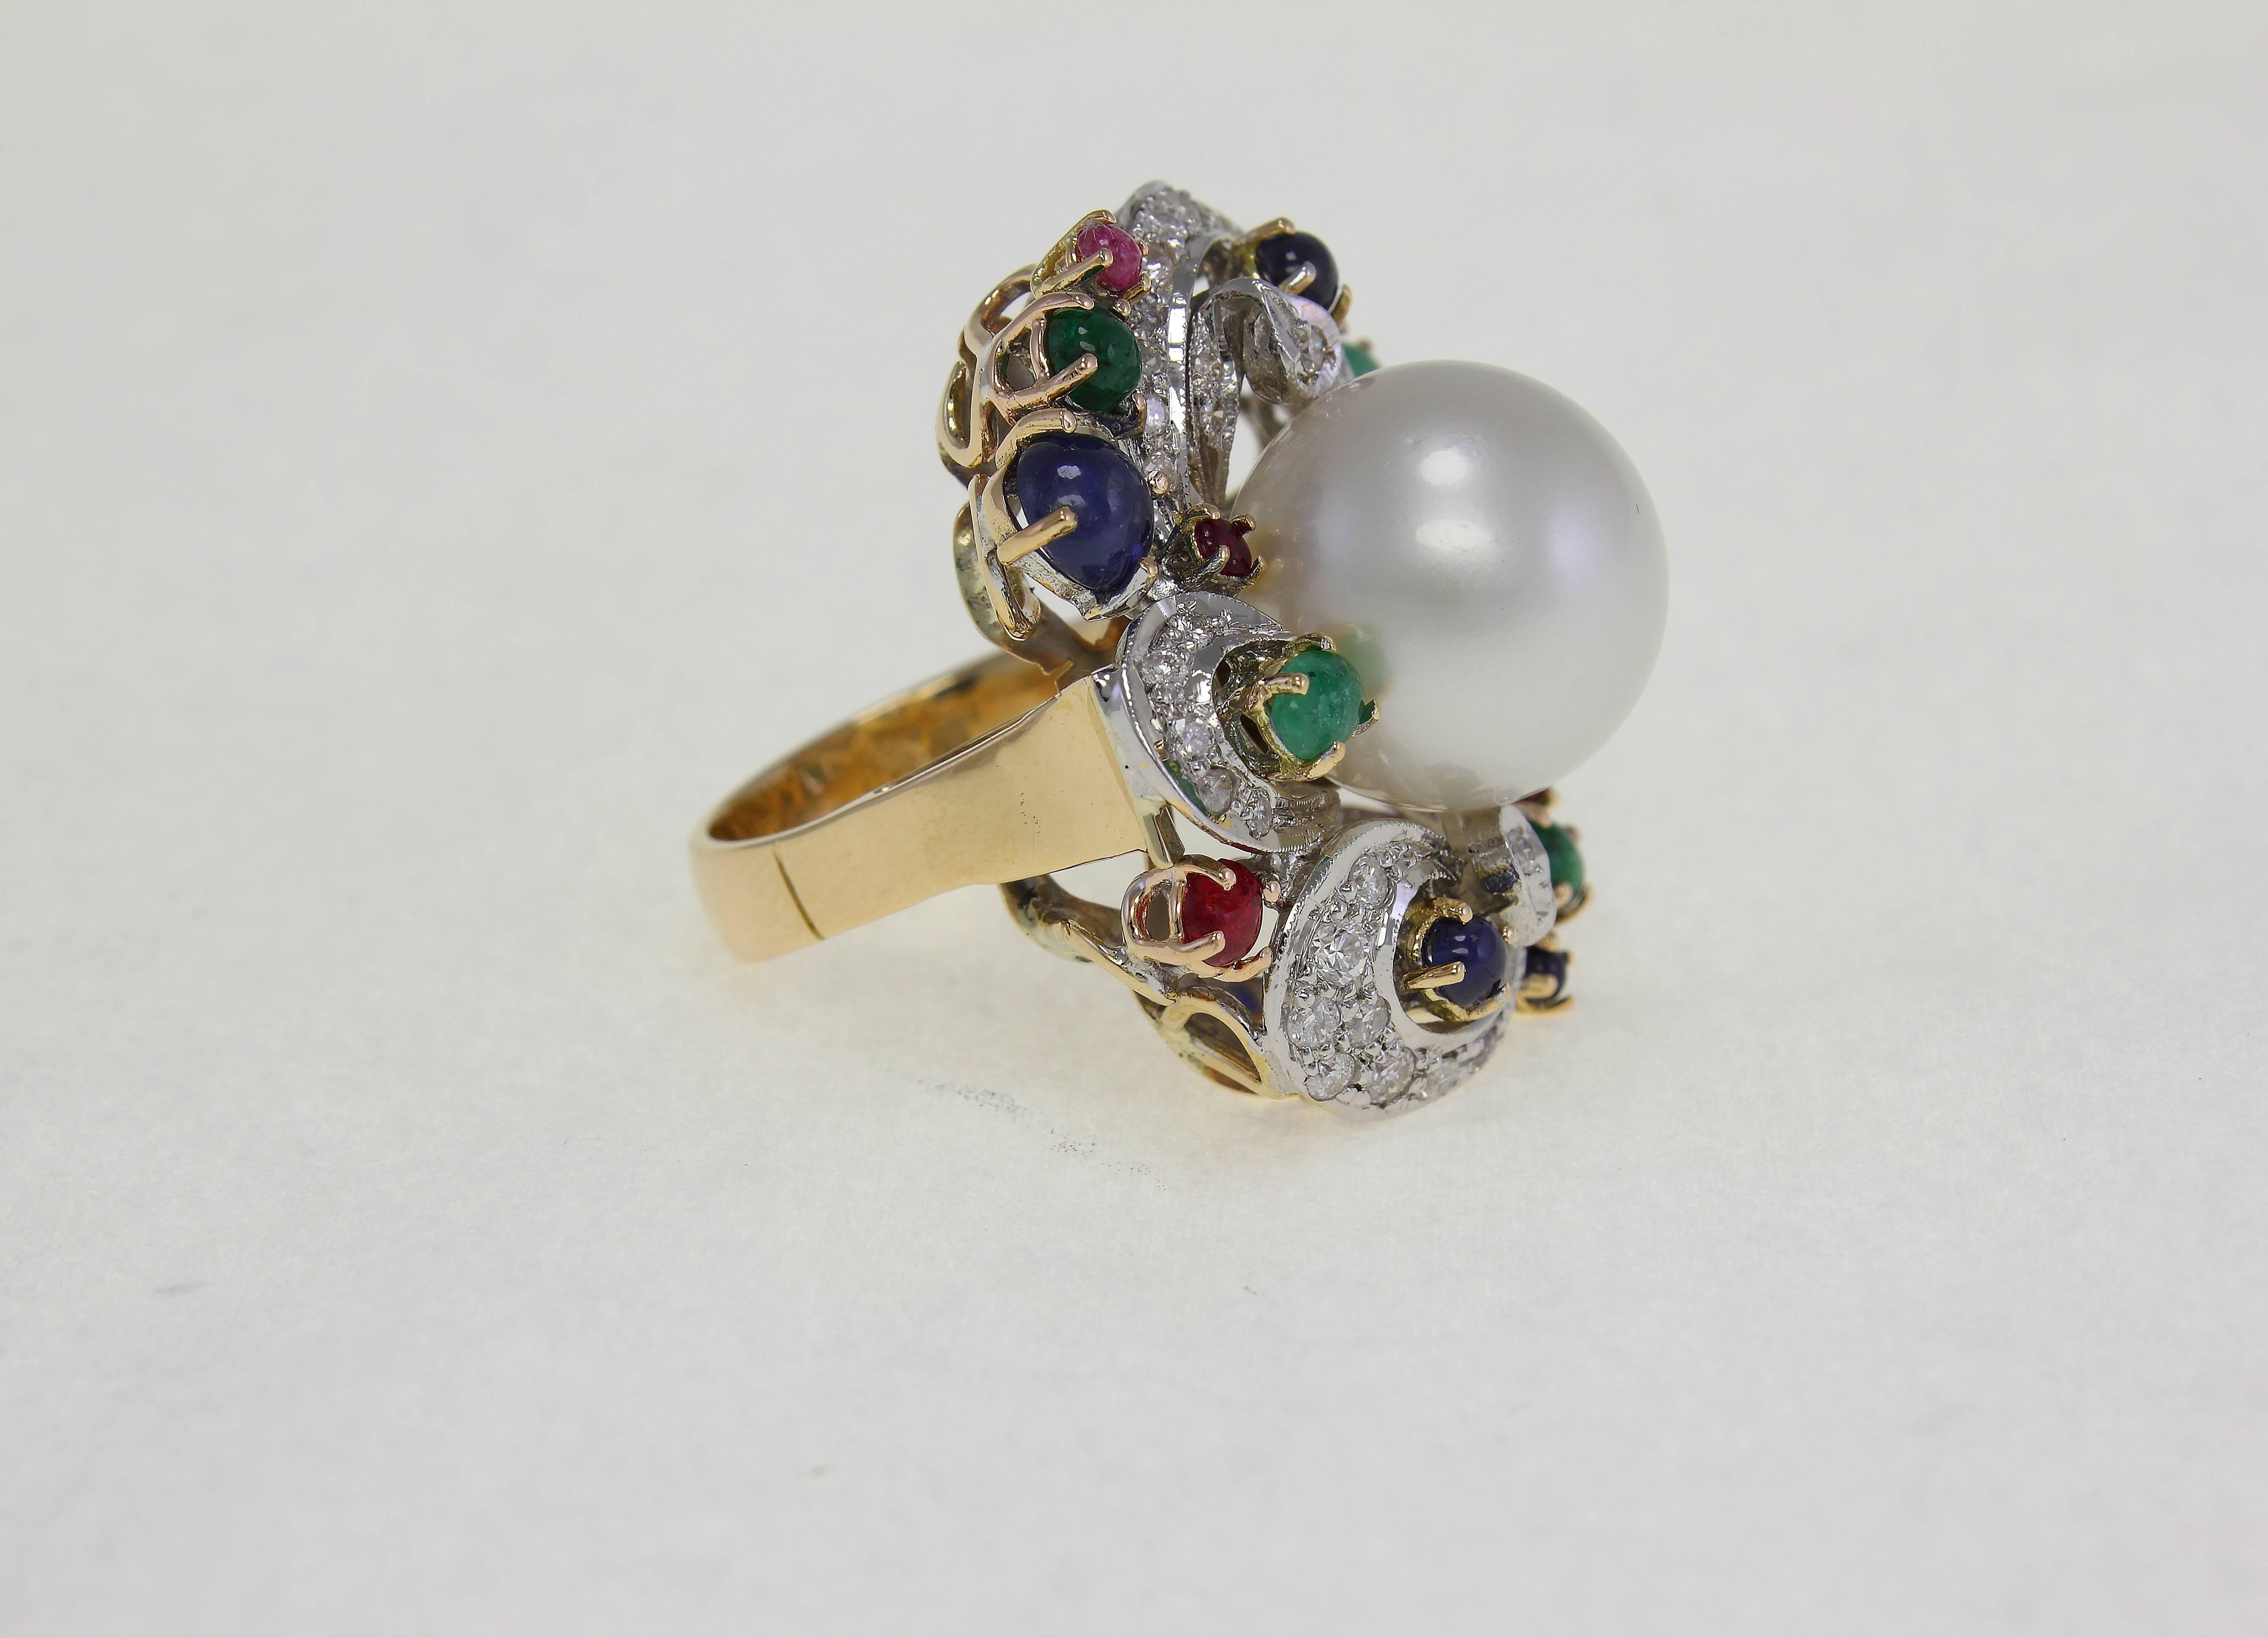  A pearl of 14.5 mm / 0.57 inch diameter in the center of a twist of a pairs of rubies & emeralds divided by single sapphires (total 5.34 carat) & diamonds (0.45 carat). 14 Kt white gold ring
US Size
Width 1.18 inch
Length 1.38 inch
Higth(worn)